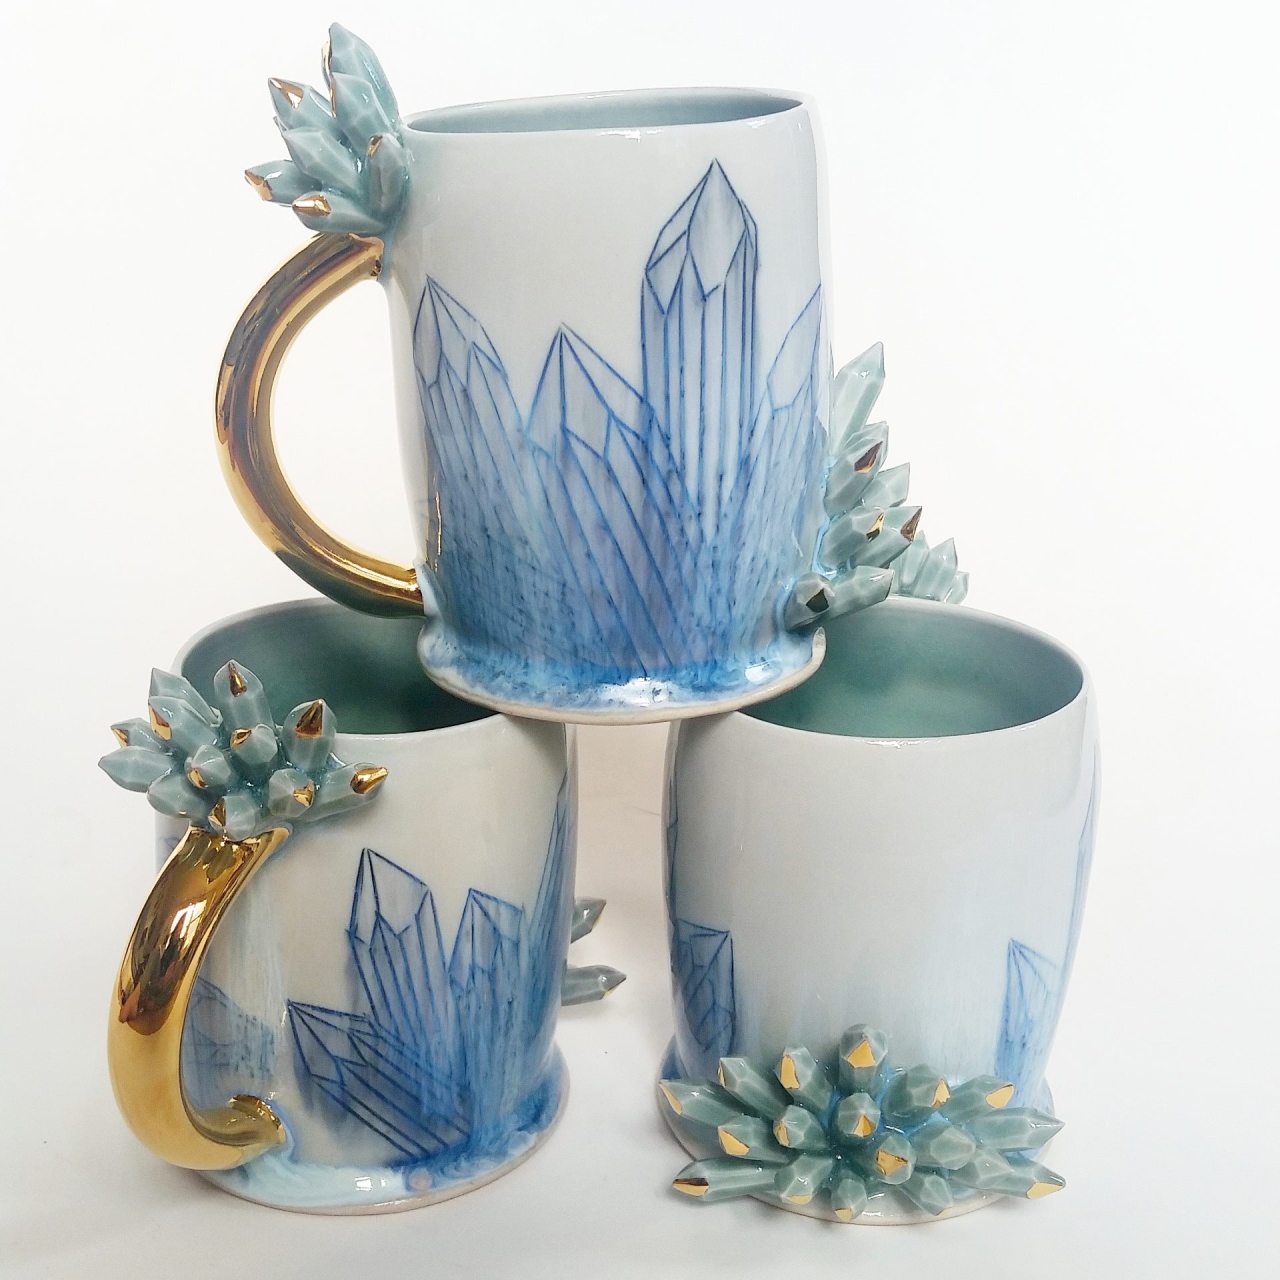 Culture N Lifestyle CNL — Exquisite Ceramic Mugs Inspired by Crystals...